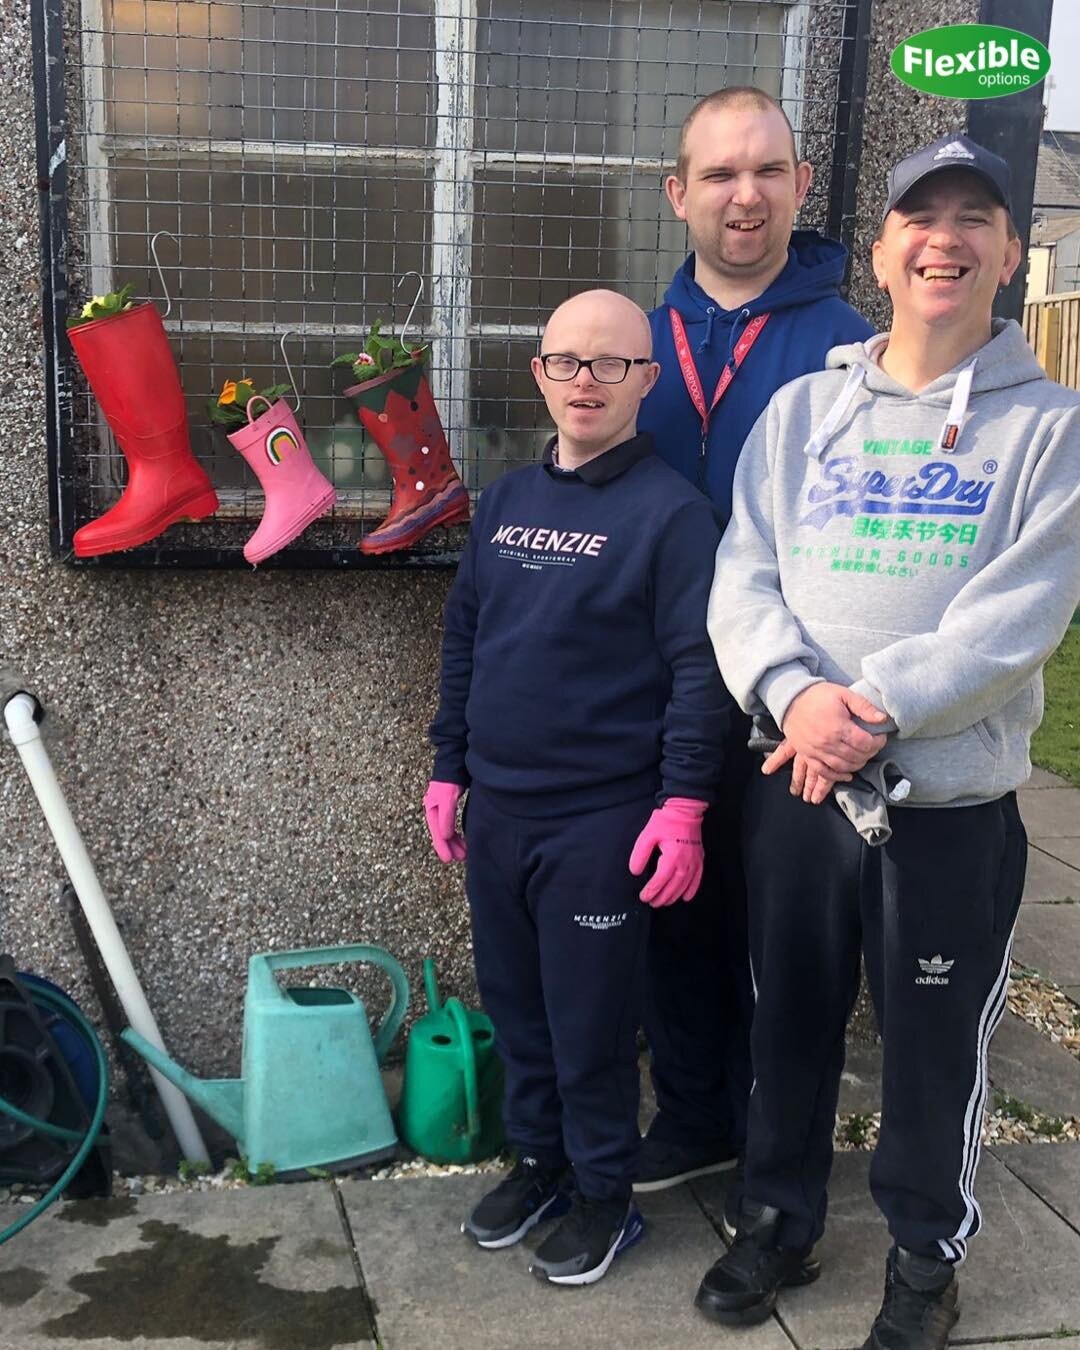 The gang at the garden project have been finishing off their planter wellies. They look amazing. Well played all. Class.

#planter #wellies #imadethis #learningdisabilities